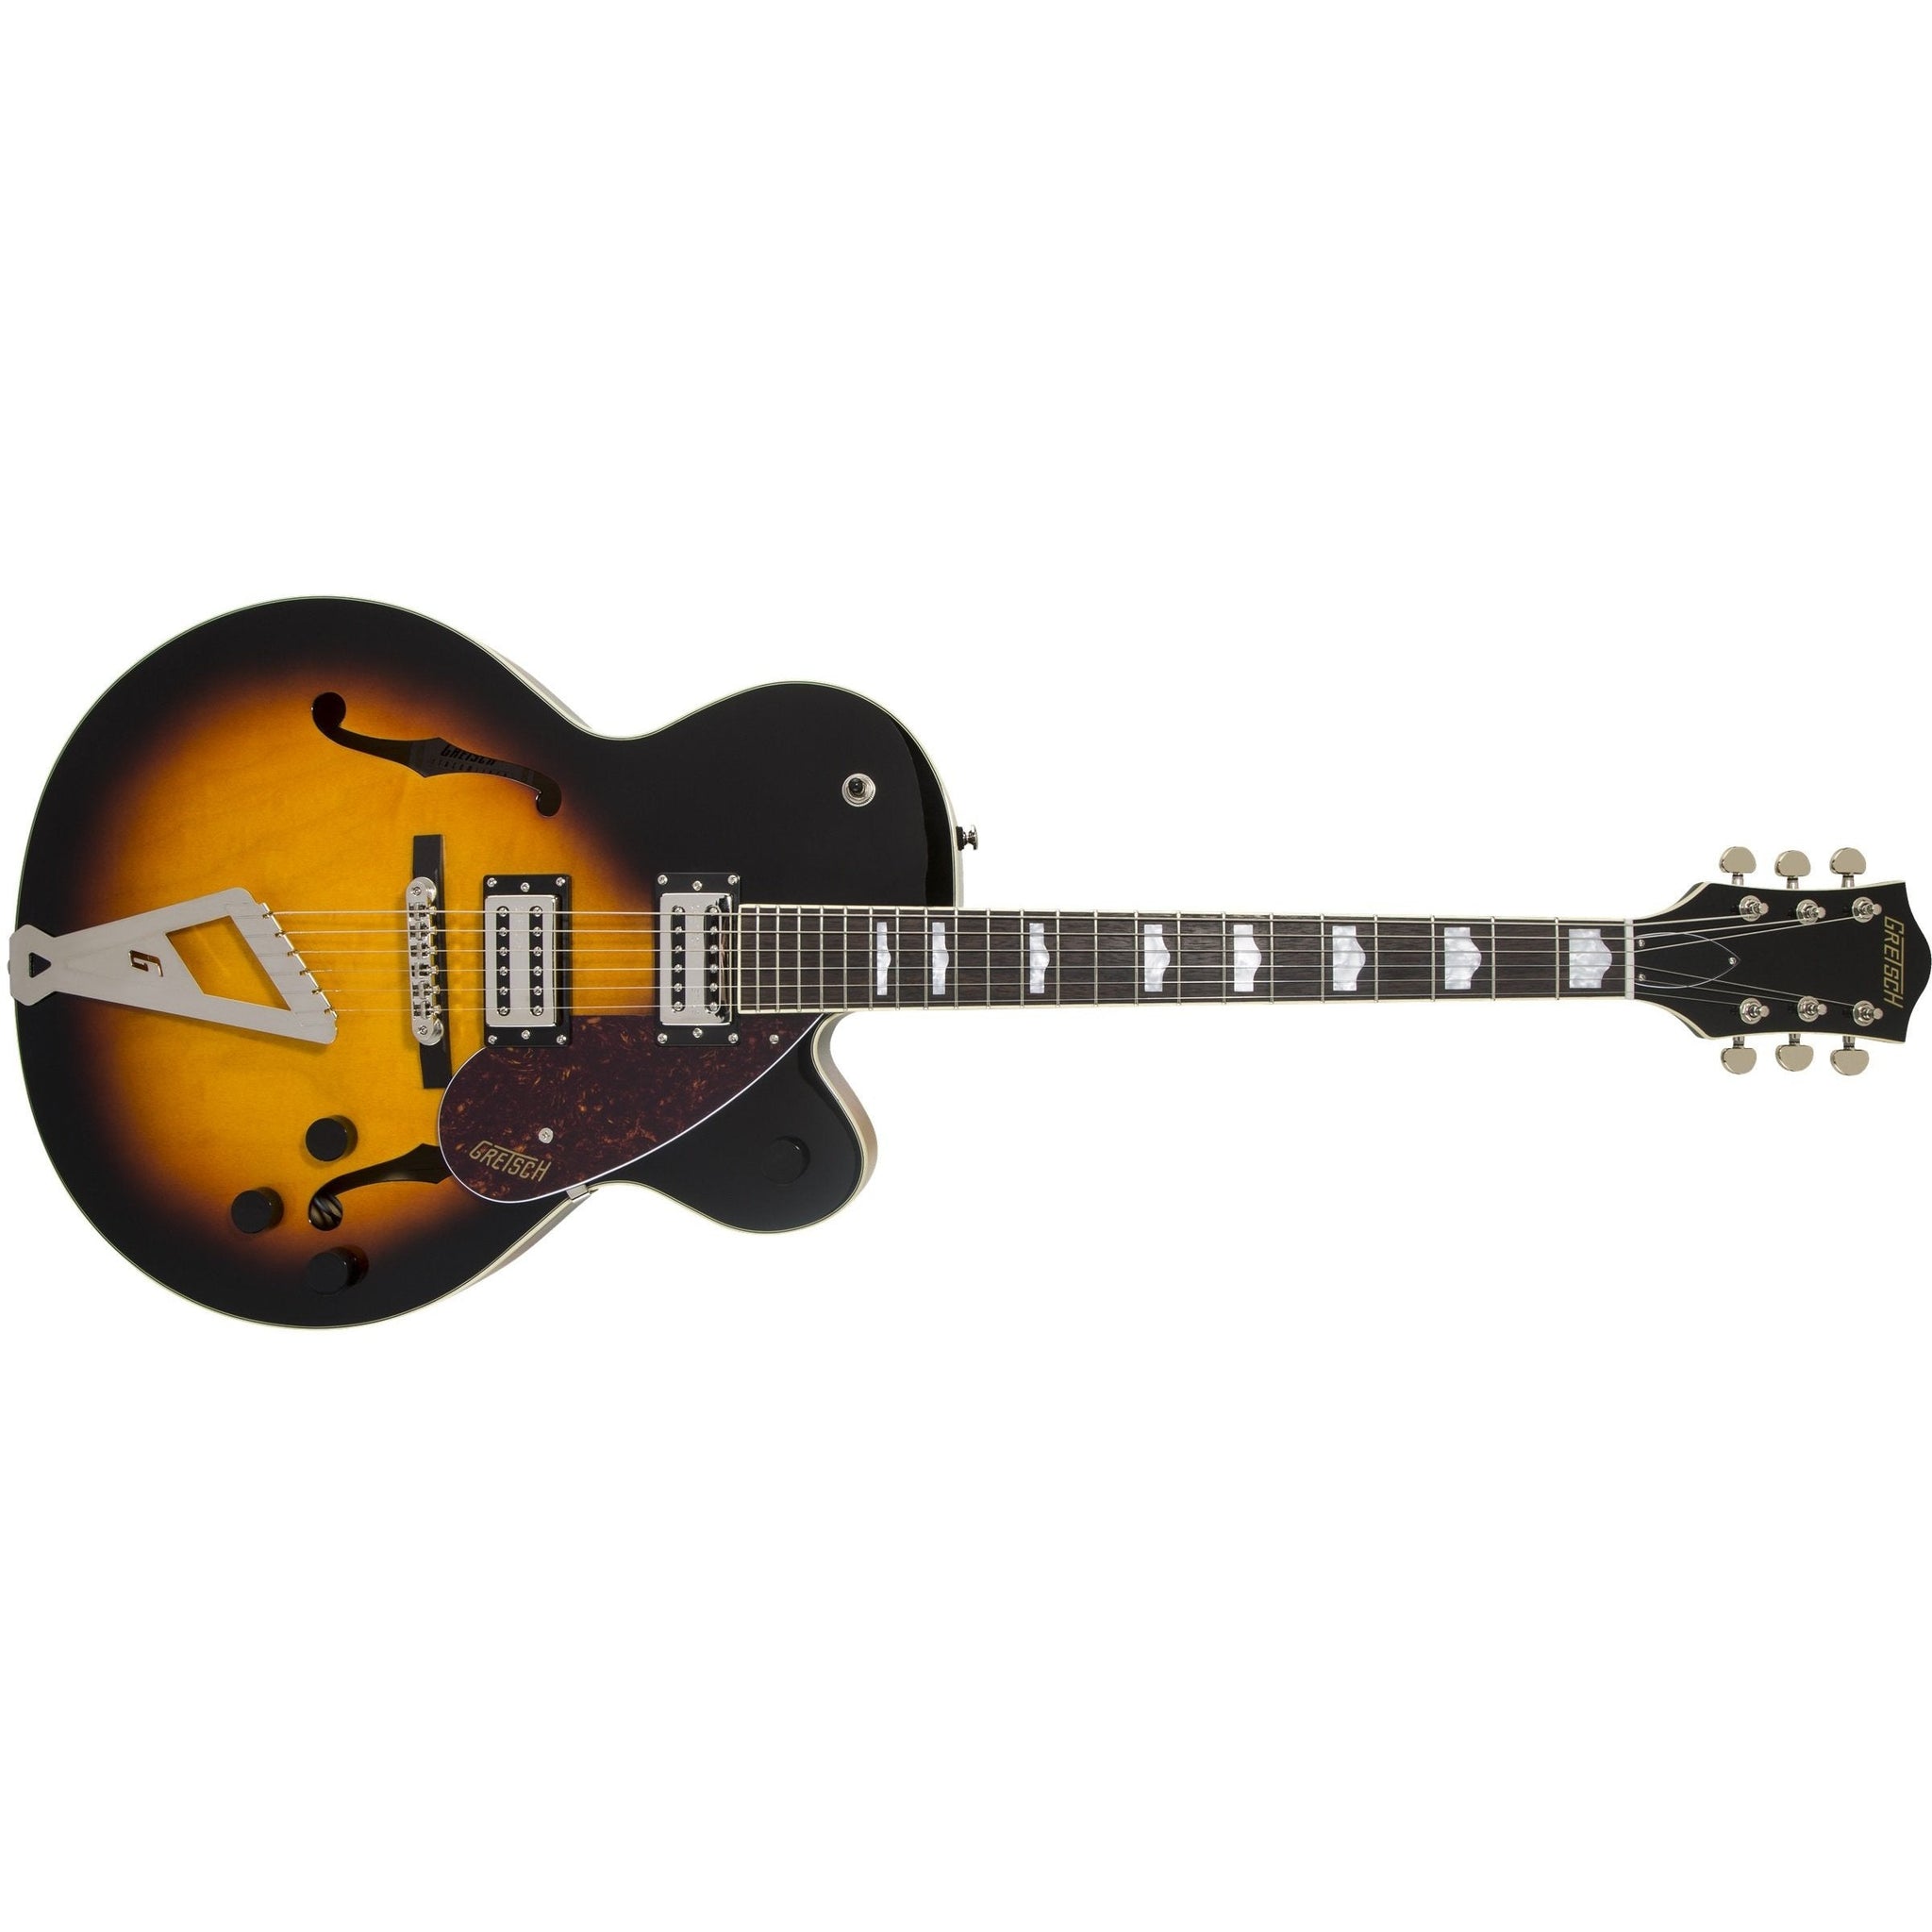 Gretsch G2420 Streamliner Hollowbody Electric Guitar with Chromatic II Tailpiece-Aged Brooklyn Burst (Discontinued)-Music World Academy